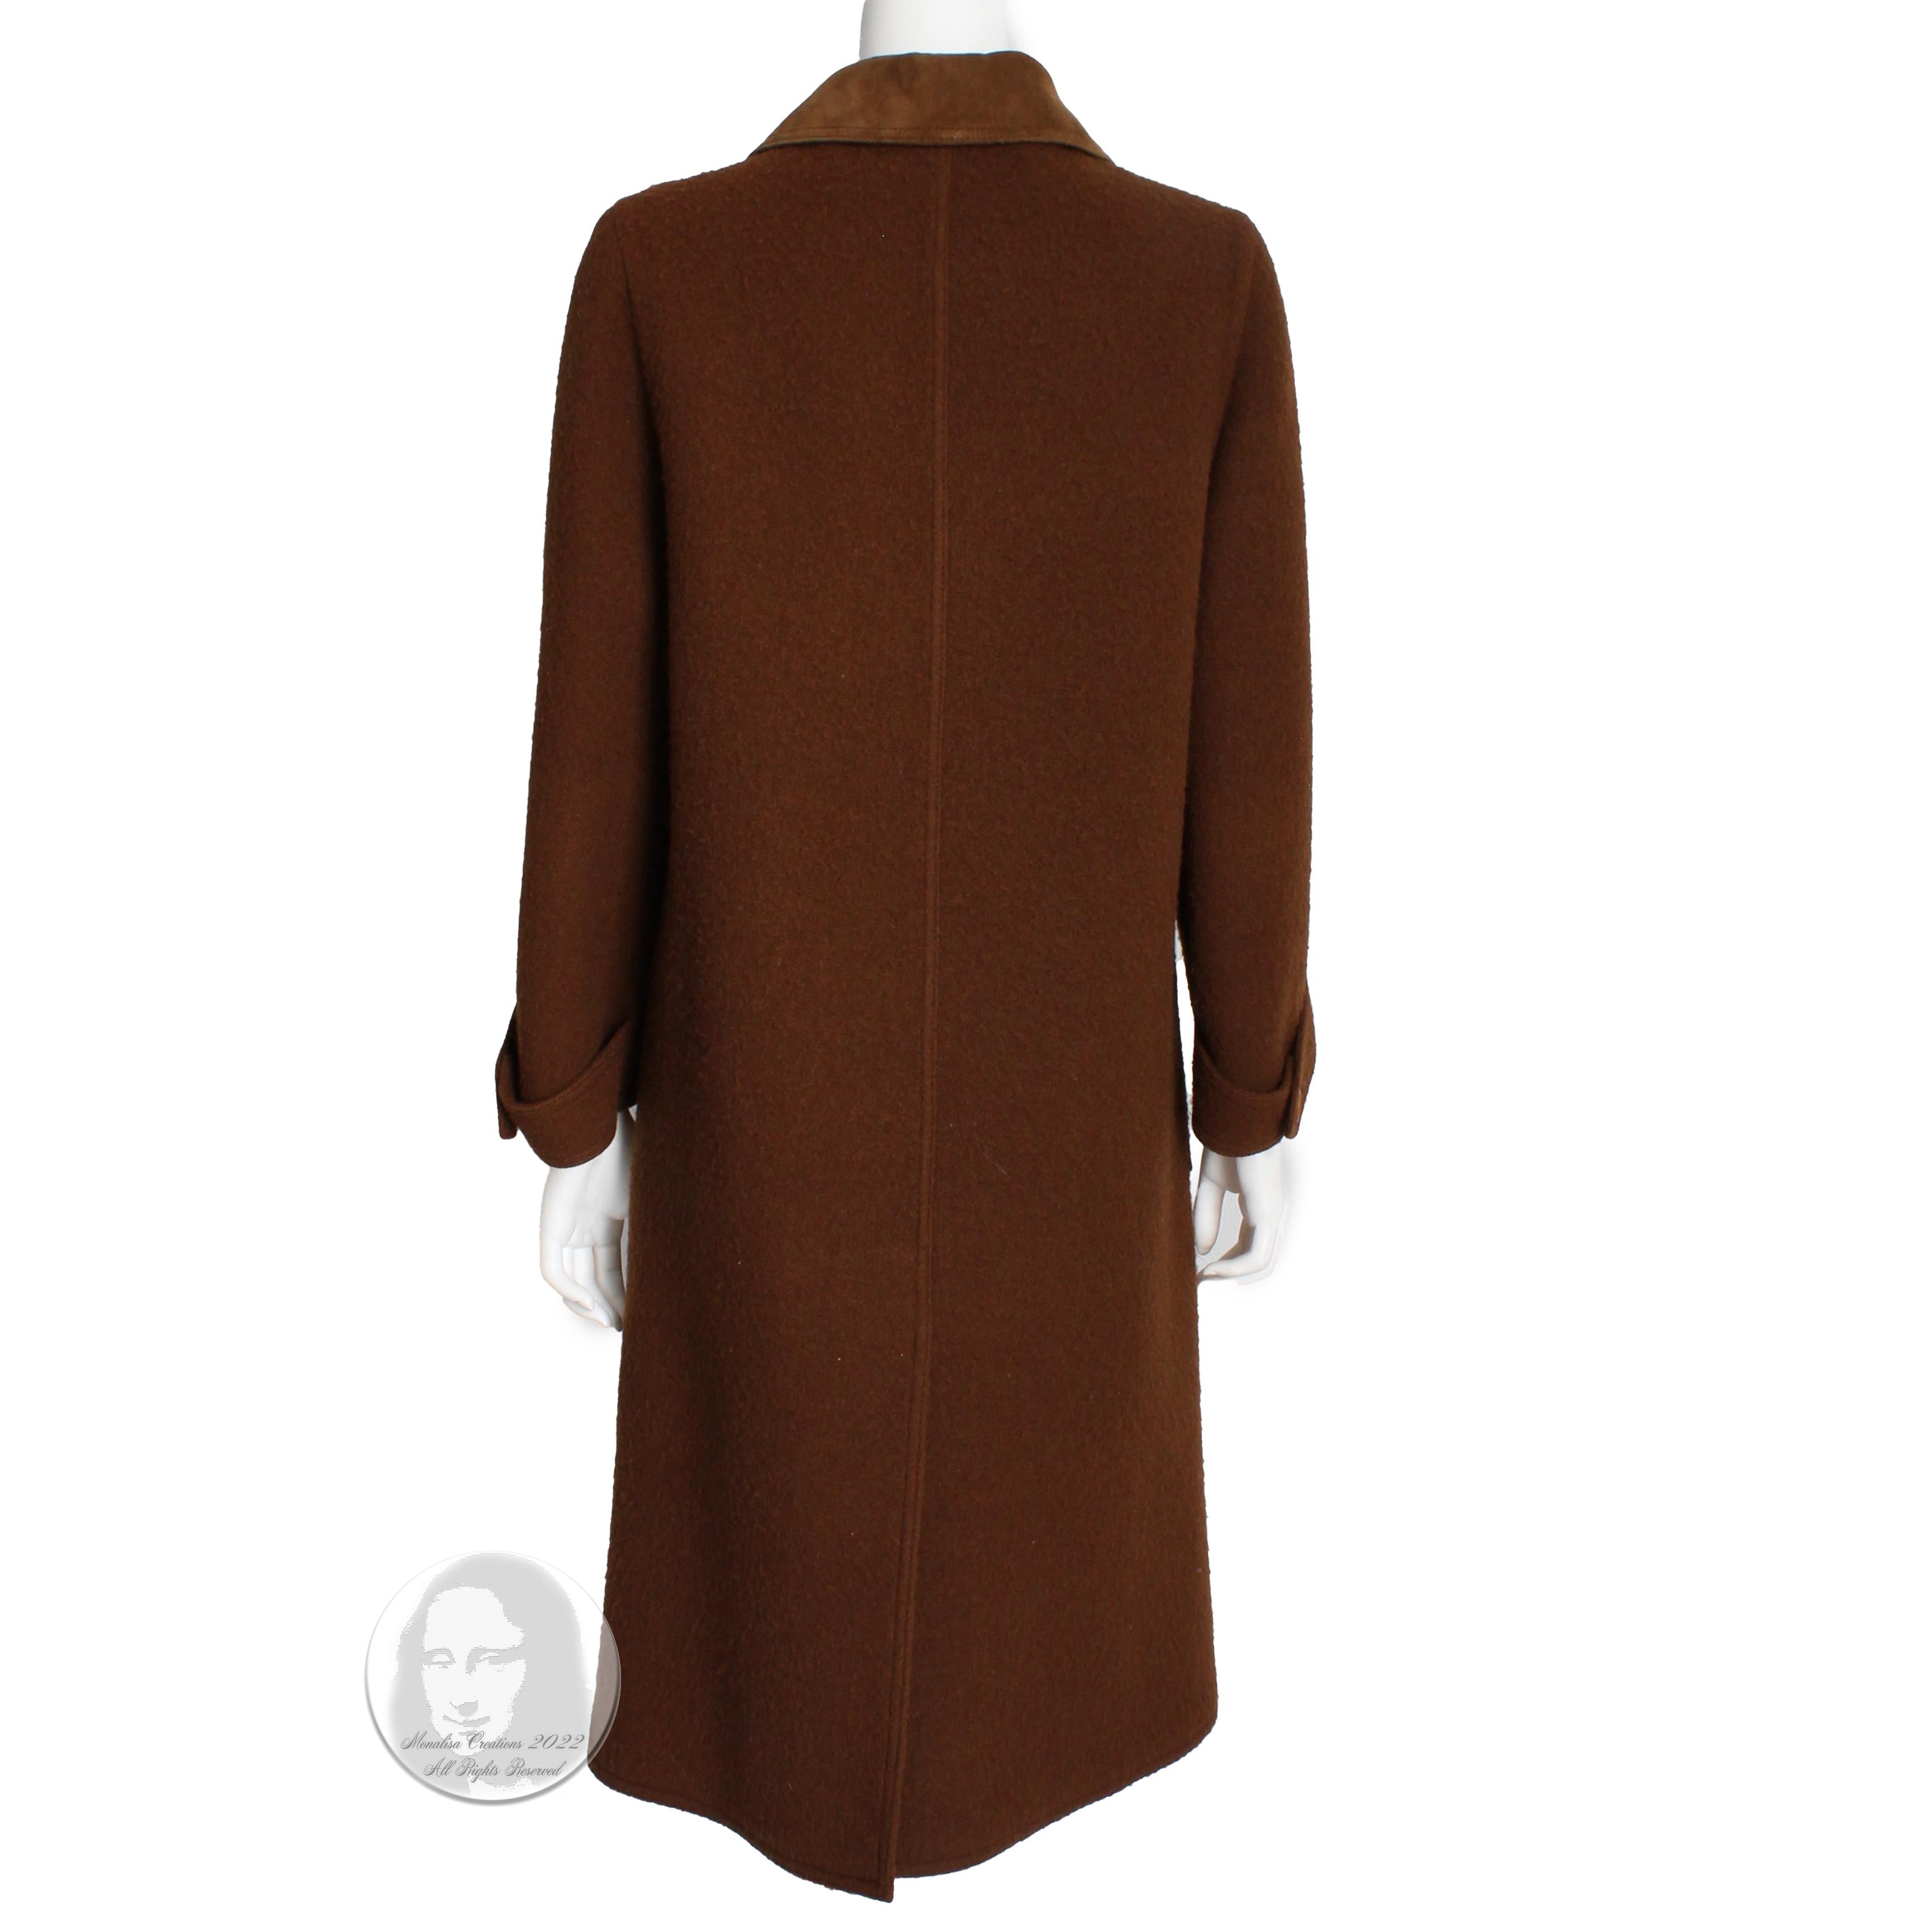 Hermes Brown Double Breasted Suede Leather Trim Trench Style Wool Coat, 1970s For Sale 5